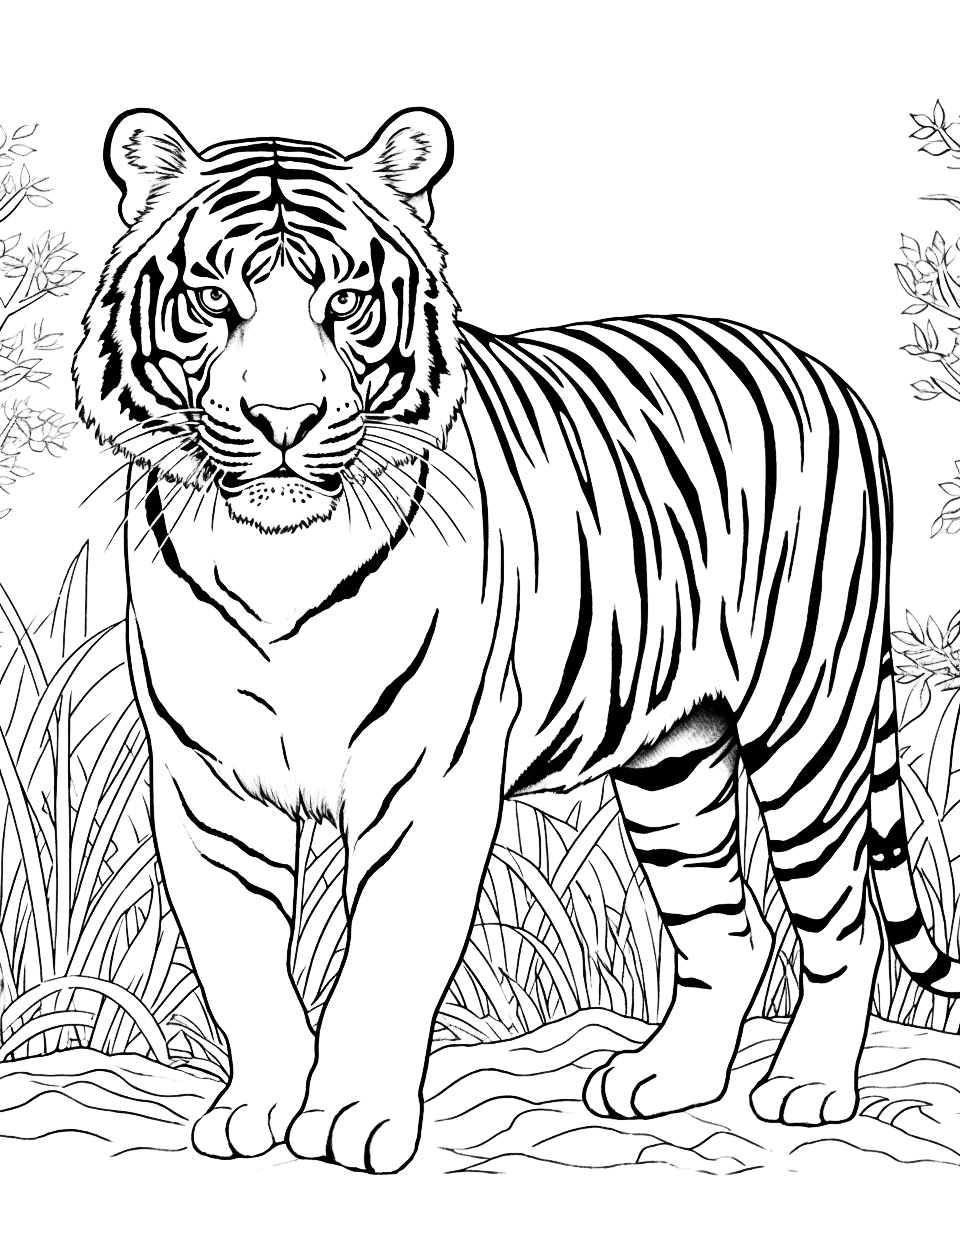 Amazon Forest Prowl Tiger Coloring Page - A tiger hunting in the heart of the Amazon, with trees and grass around.